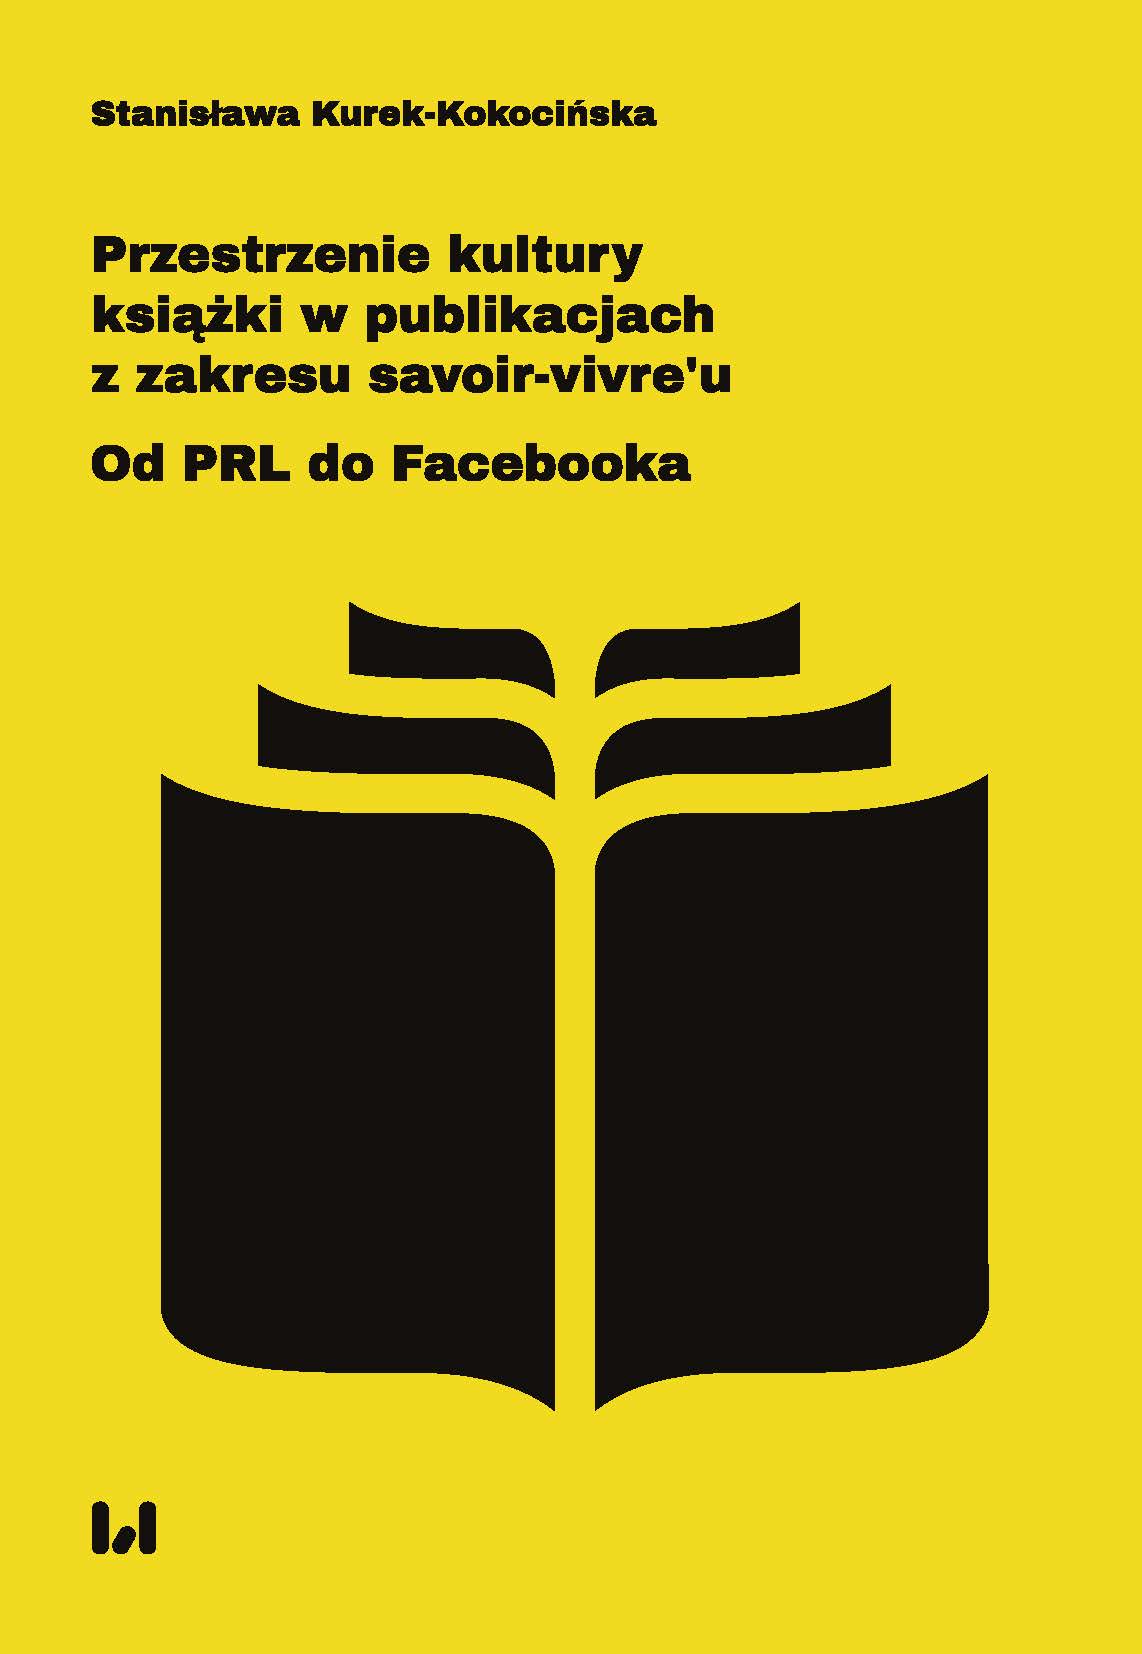 The areas of book culture in the light of savoir-vivre publications. From Polish People’s Republic (PRL) to Facebook